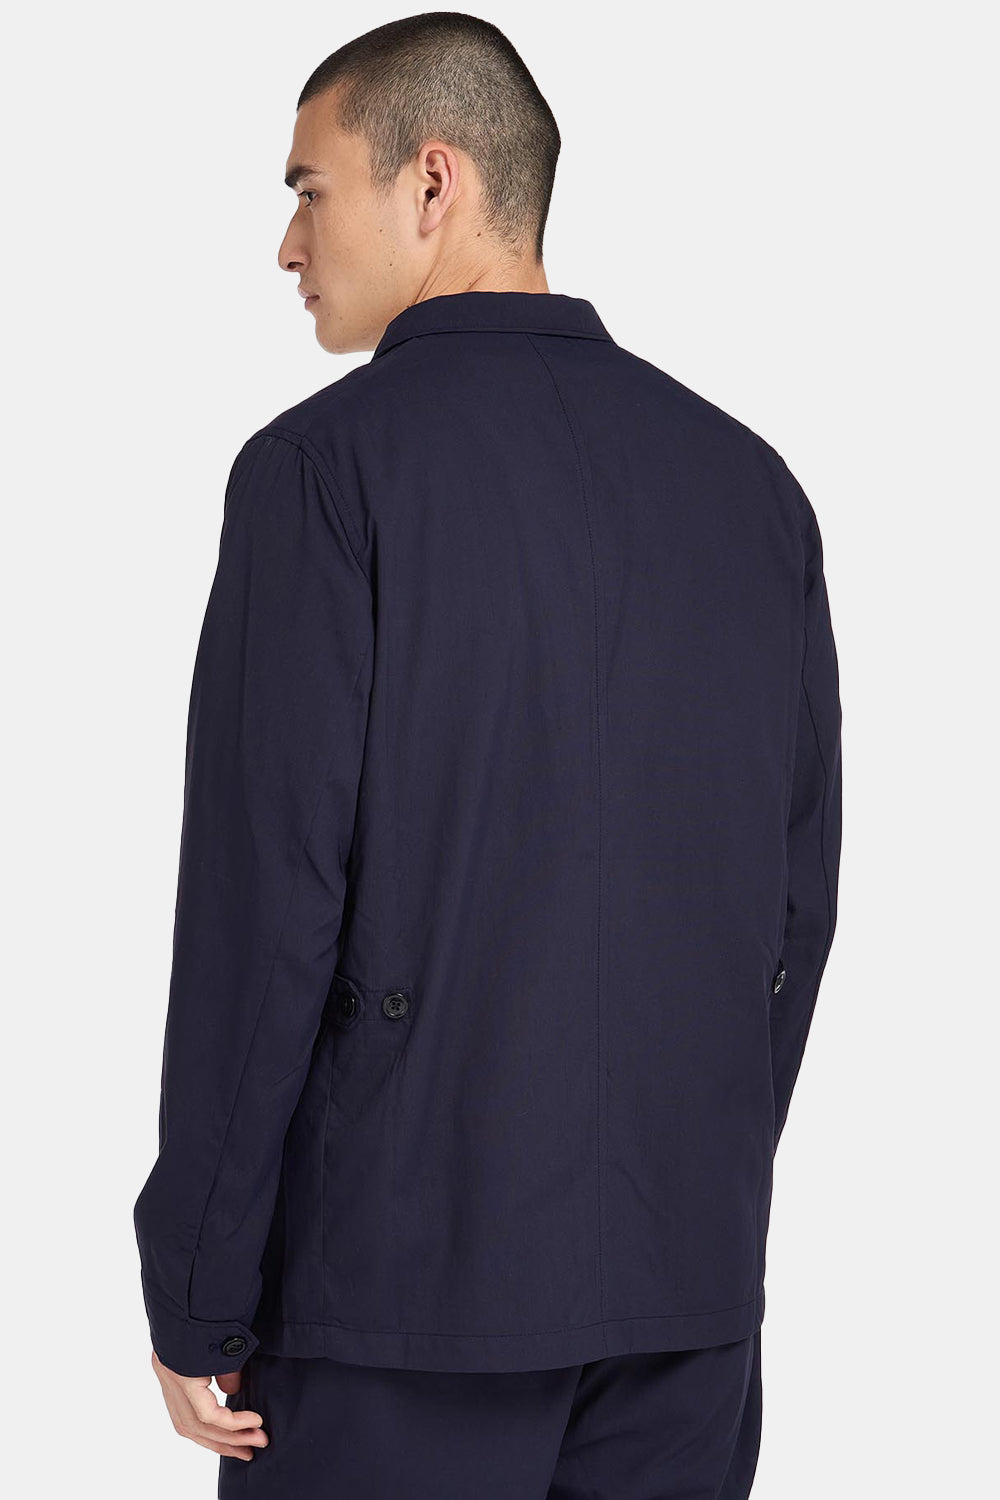 Barbour White Label Nelson Lightweight Jacket (Night Sky)